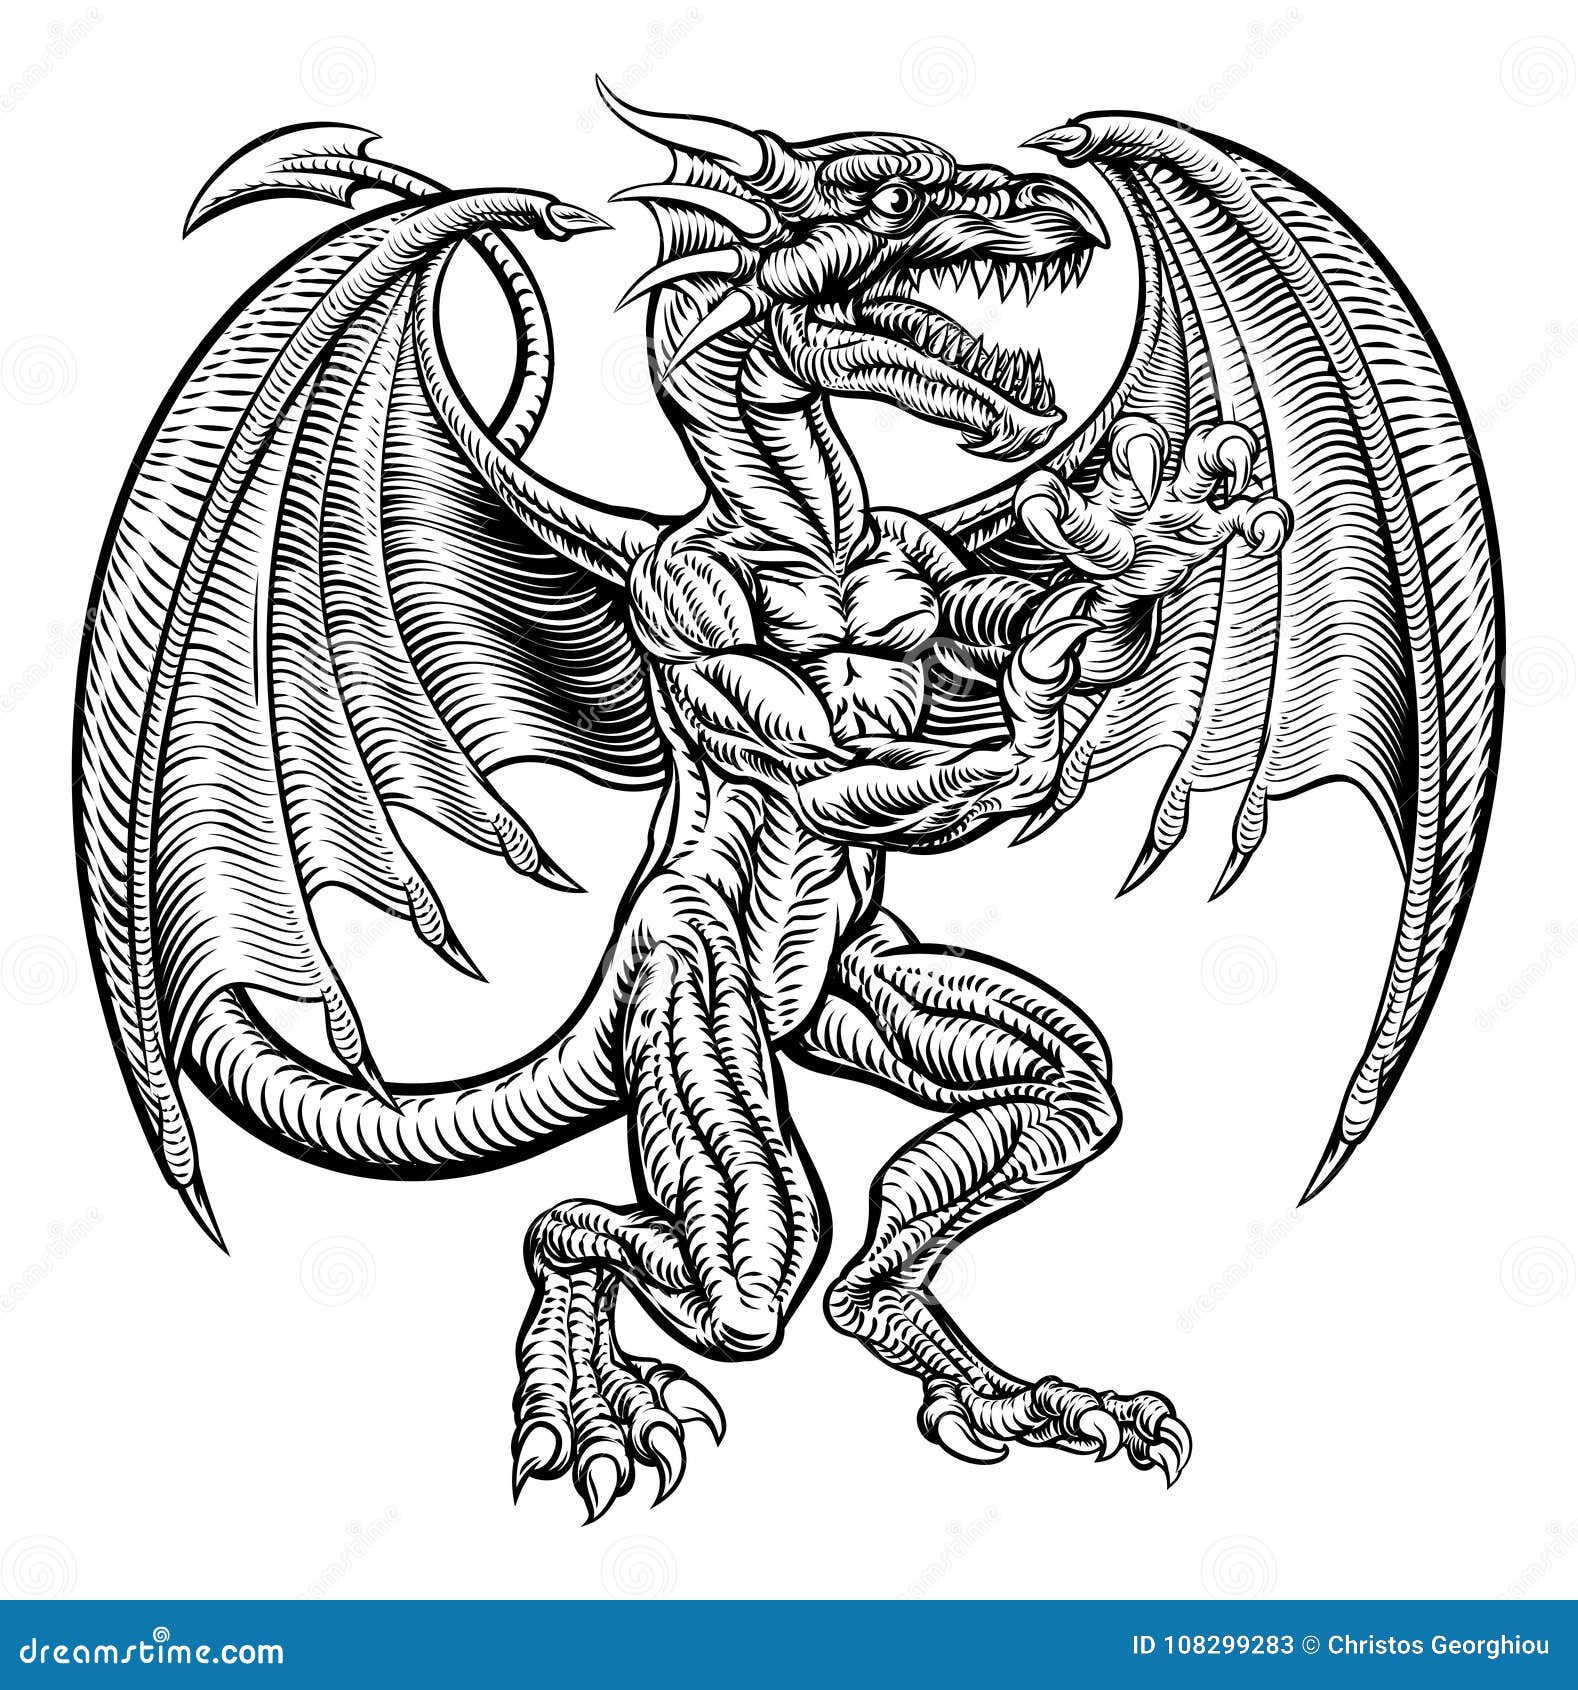 Dragon Sketch Images  Browse 26092 Stock Photos Vectors and Video   Adobe Stock